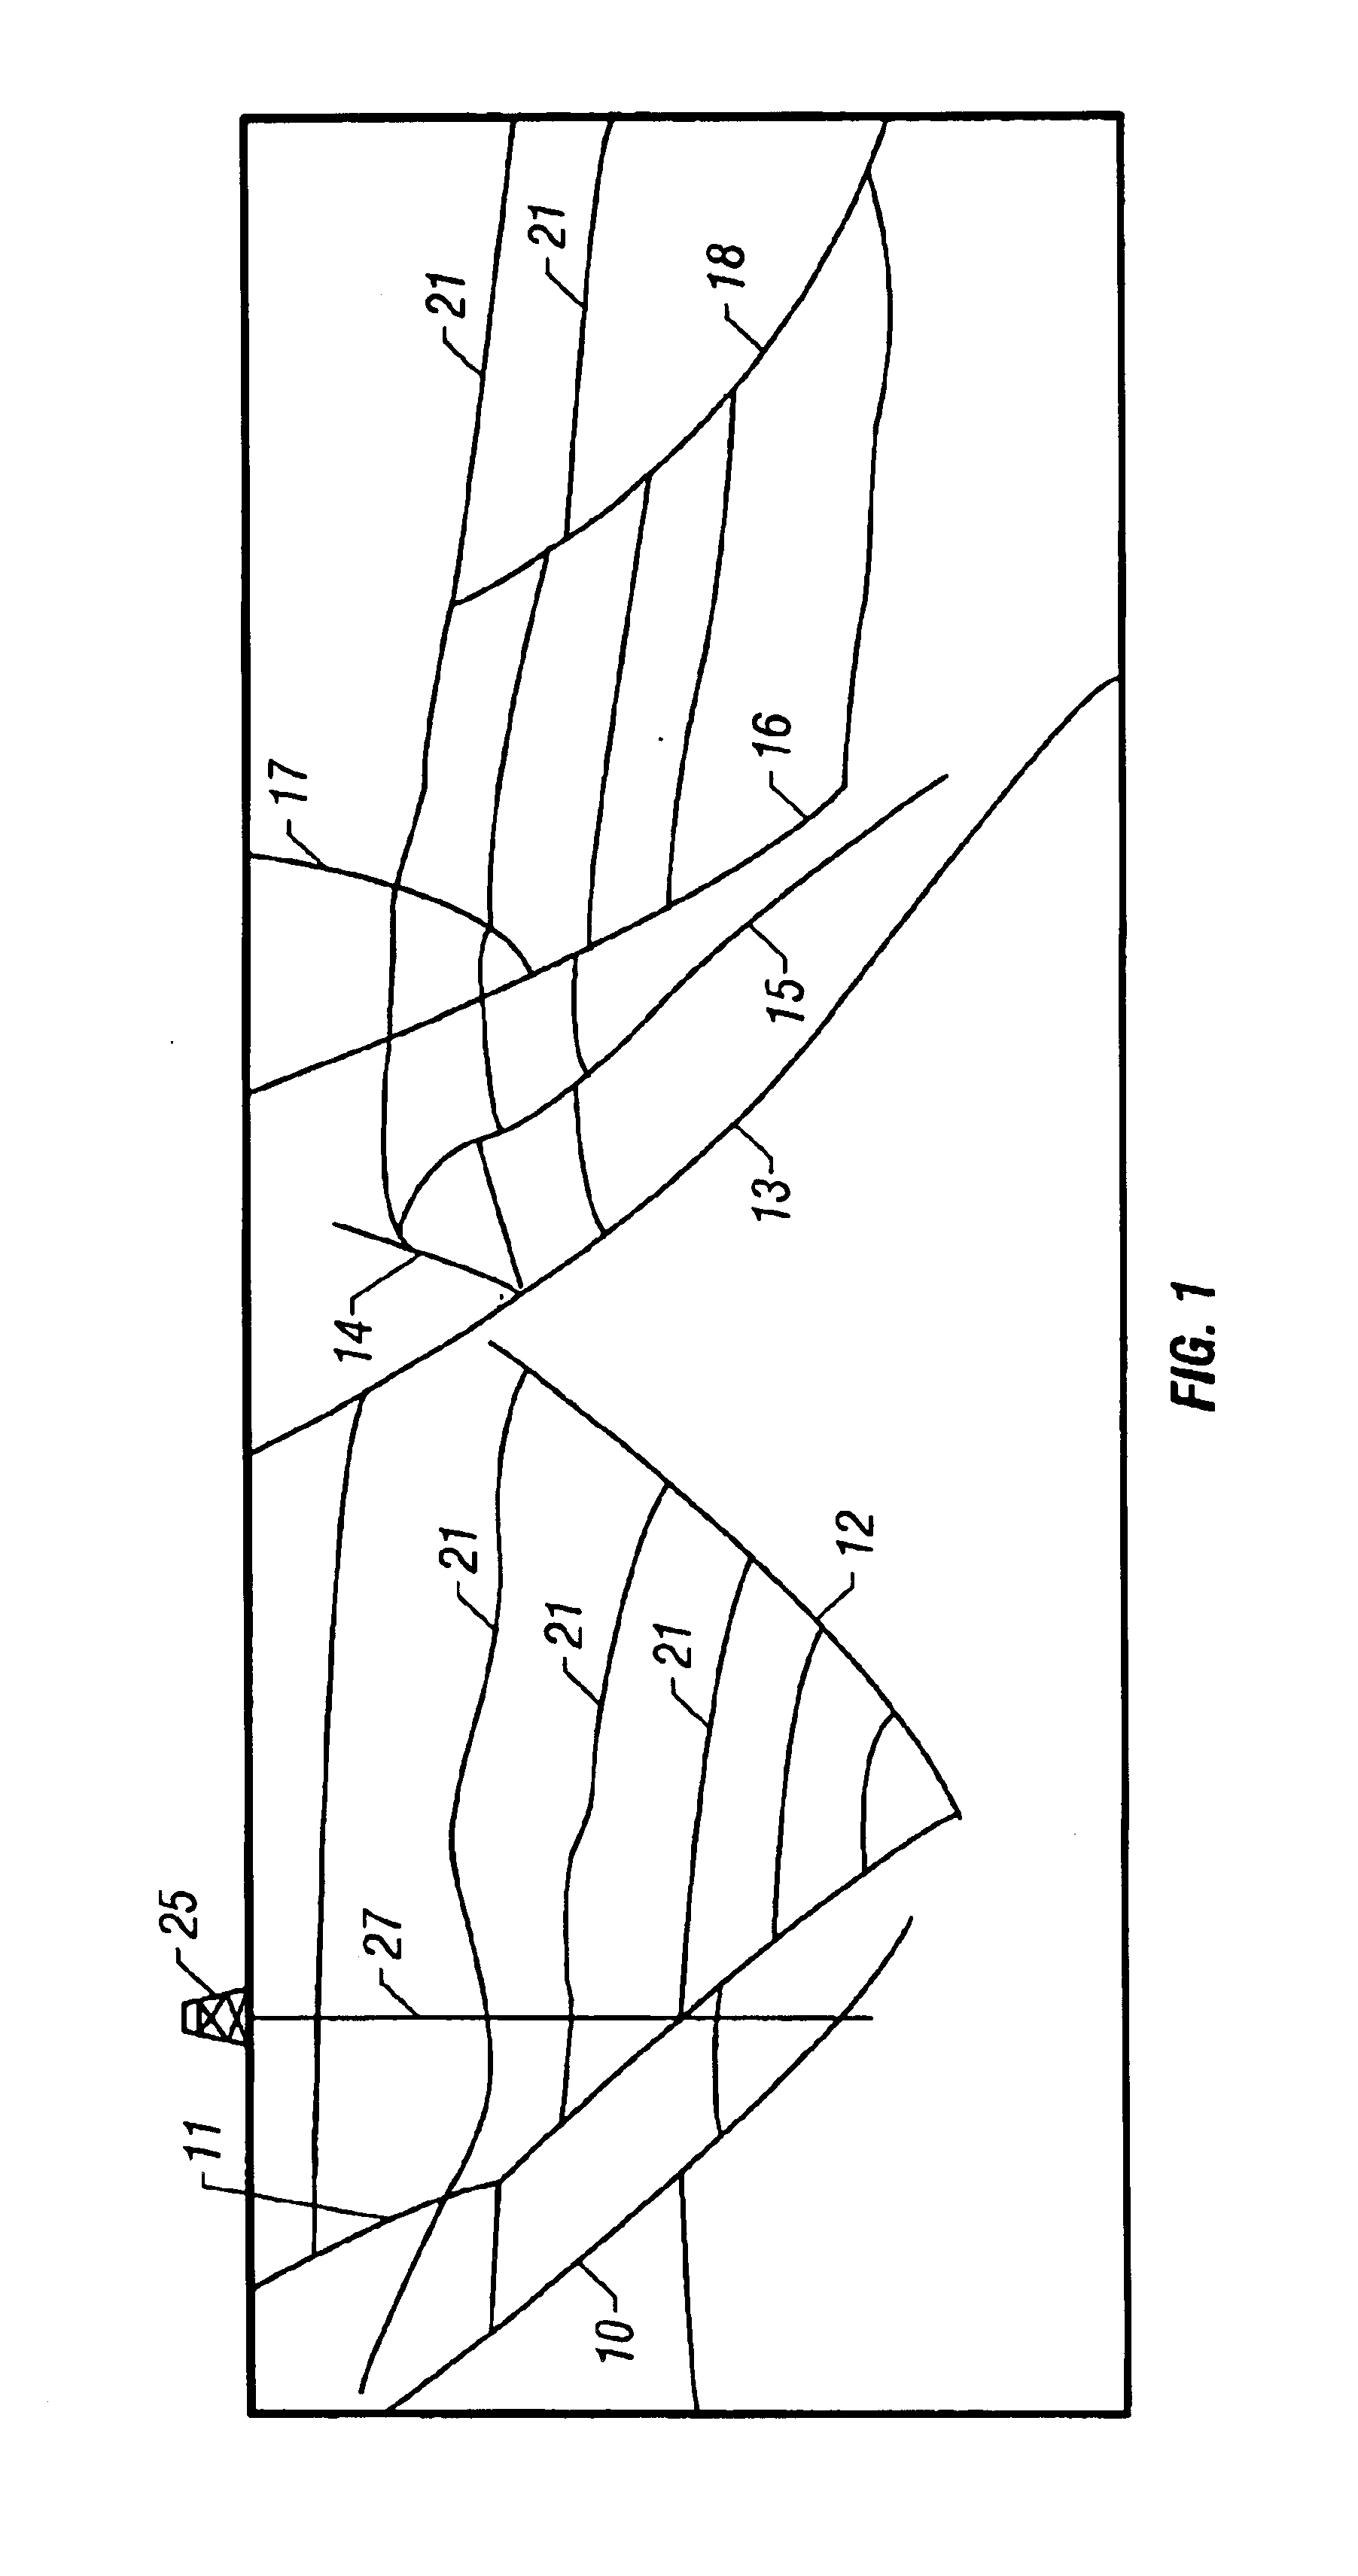 Method and process for prediction of subsurface fluid and rock pressures in the earth